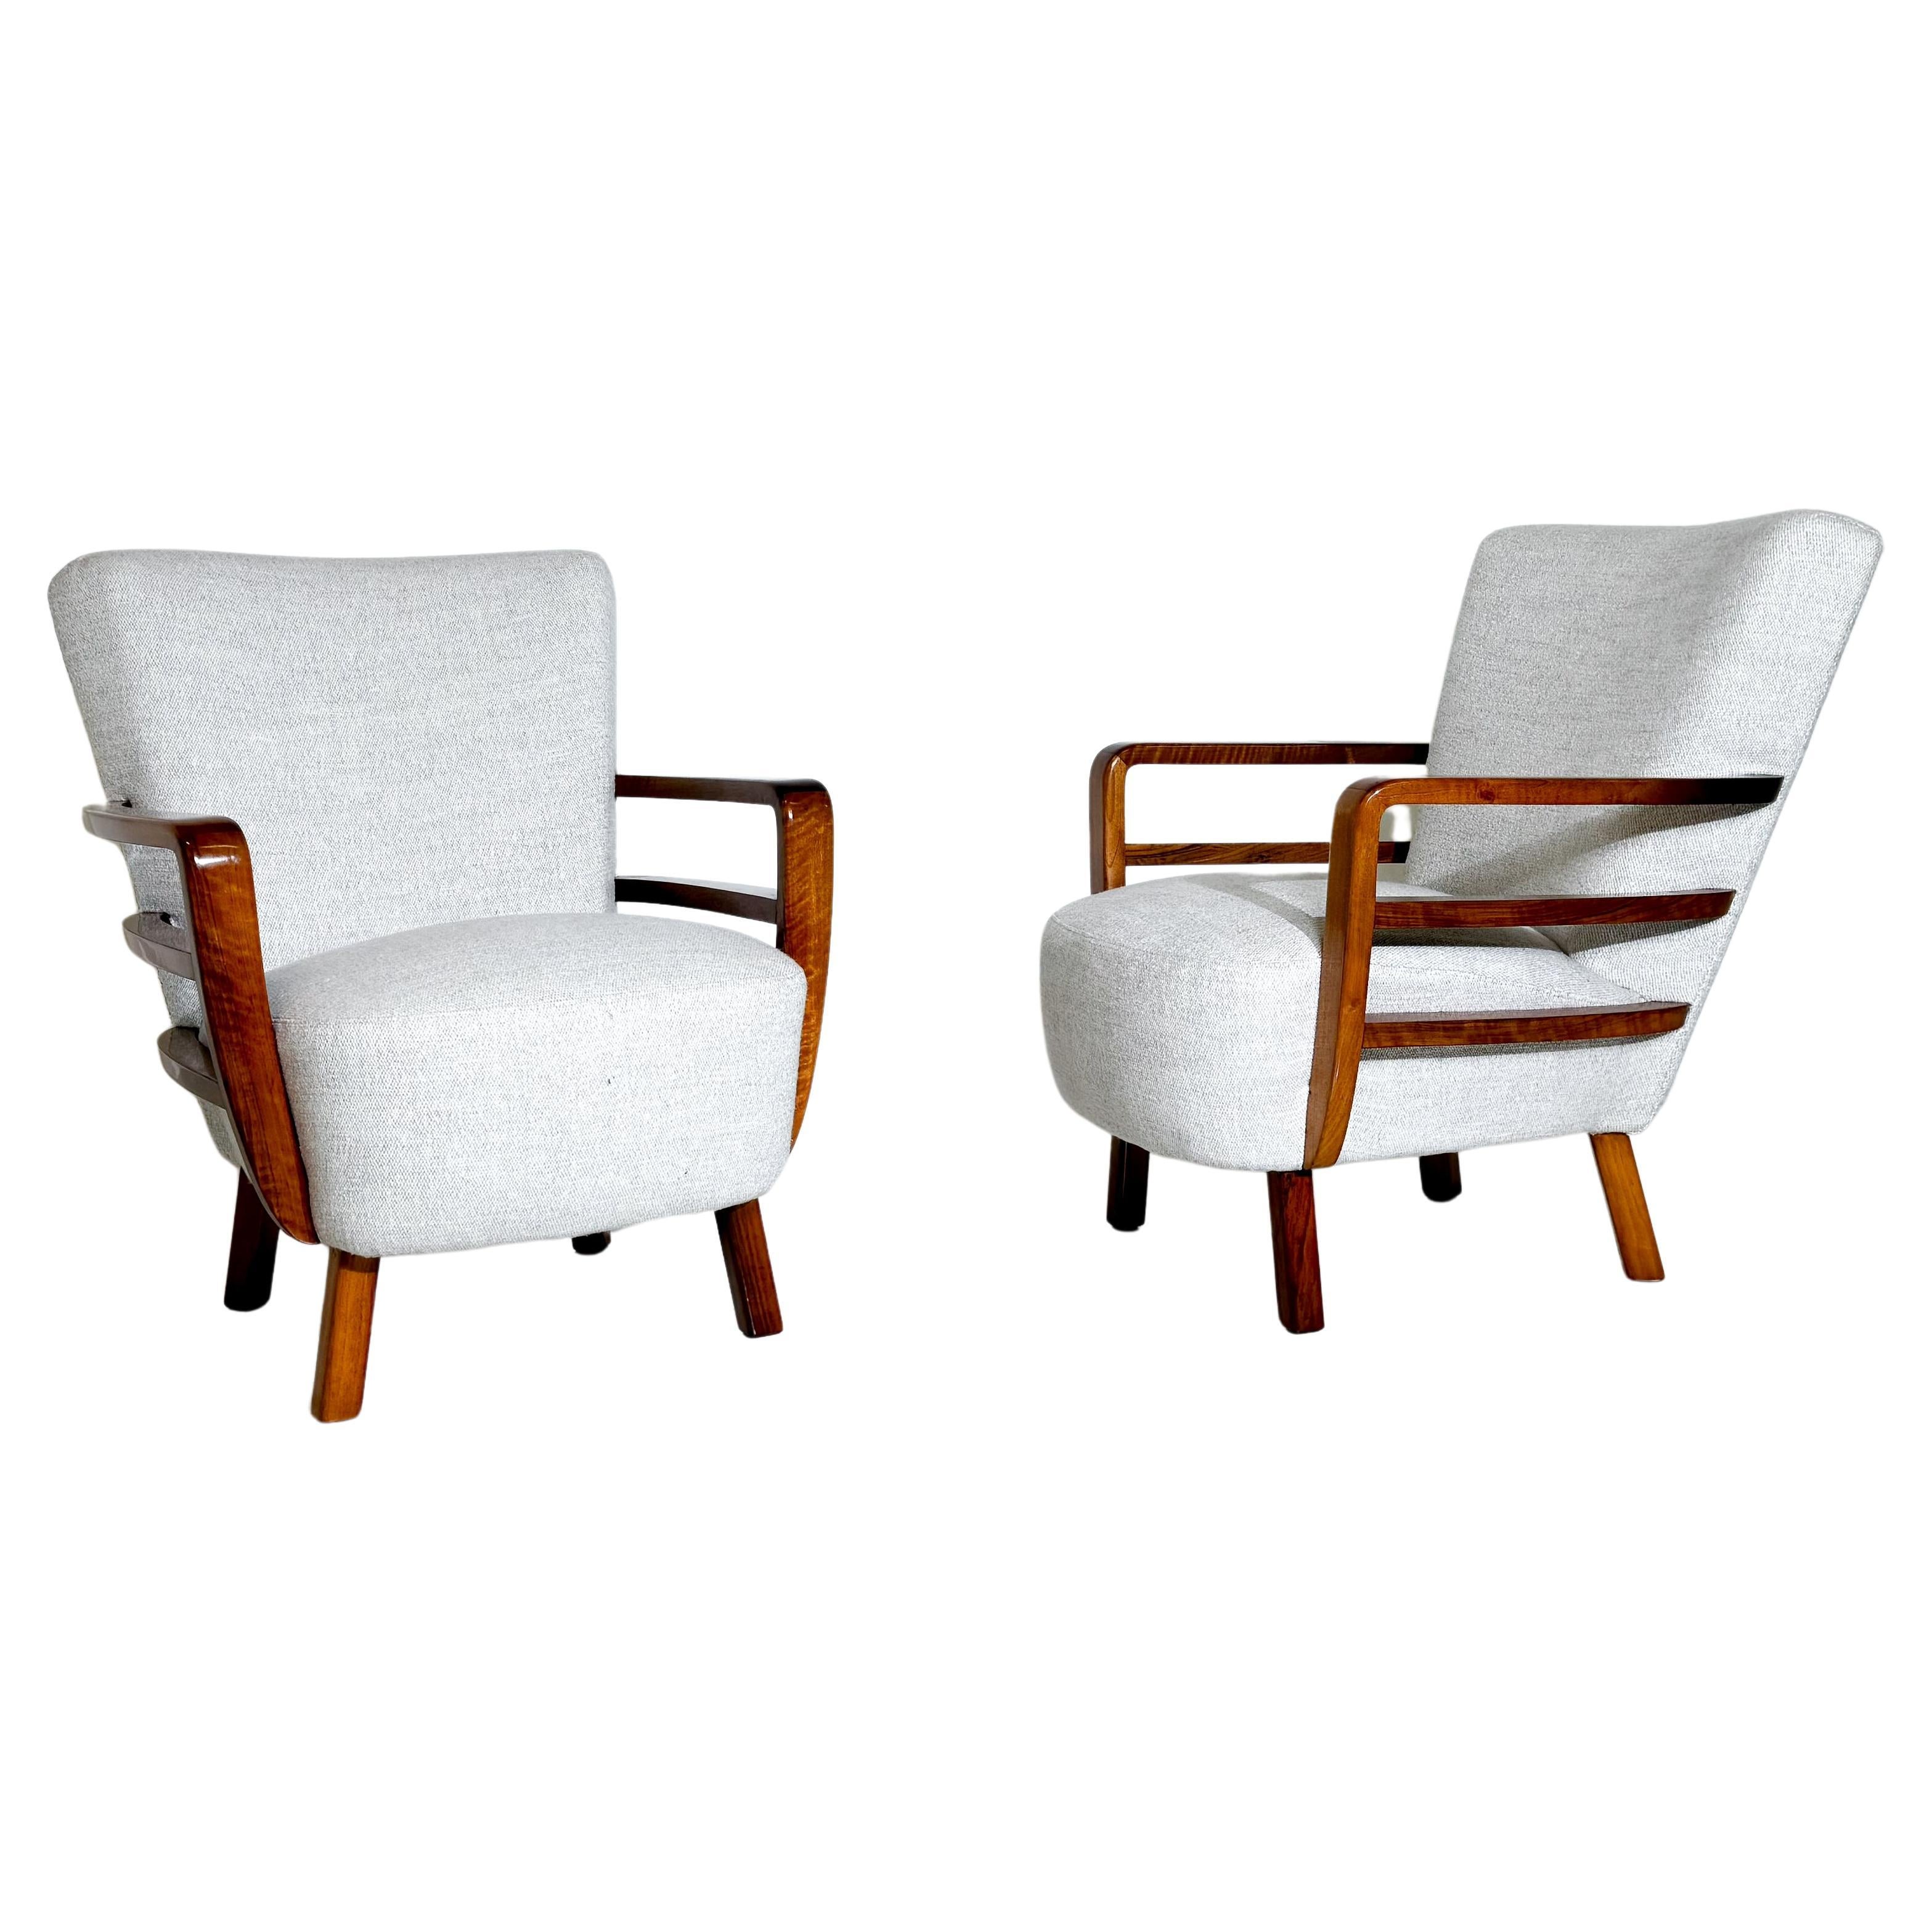 Pair of Art Deco Armchairs, Walnut, Hungary - New Upholstery For Sale